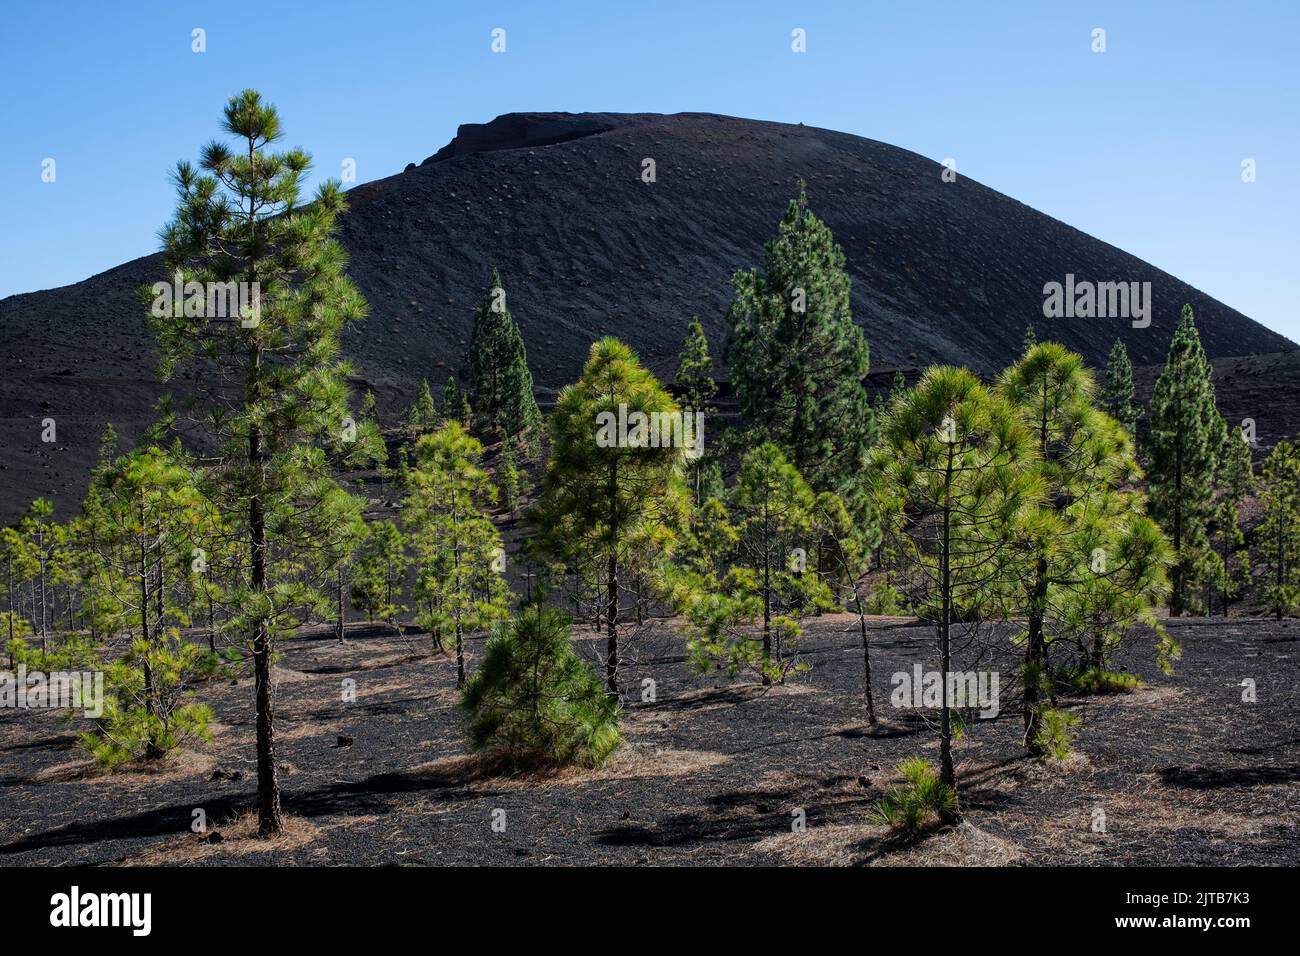 Canarian pine trees and the volcanic landscape of the Montaña Negra volcano at Chinyero, Tenerife, Canary Islands, Spain Stock Photo